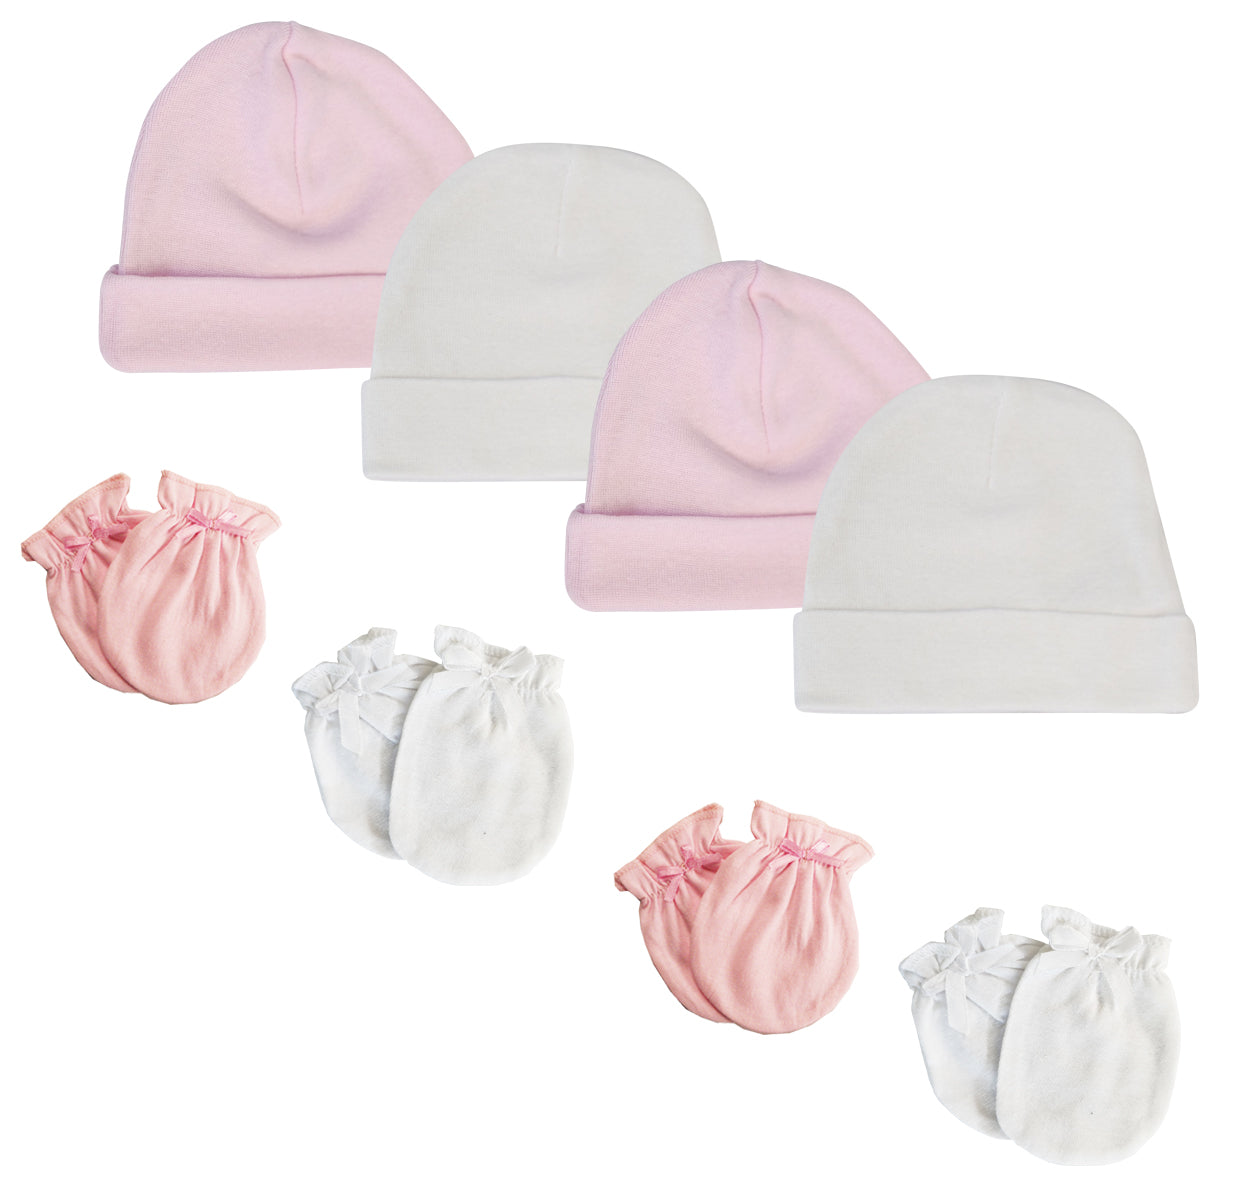 Baby Girls Cap and Infant MIttens - 8 pc Set NC_0257